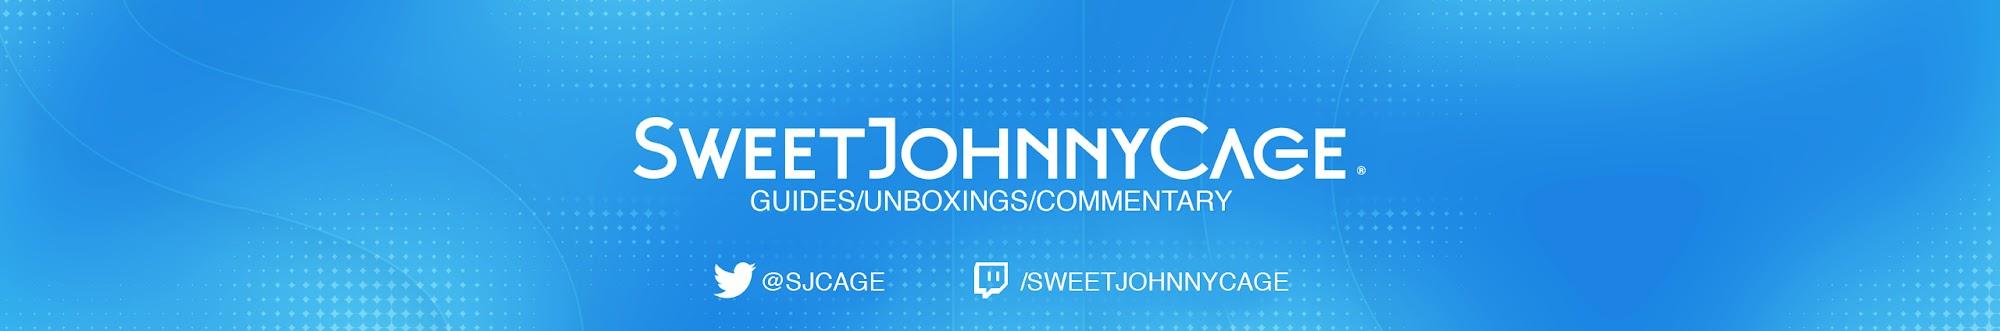 SweetJohnnyCage - Narrated Guides & Walkthroughs